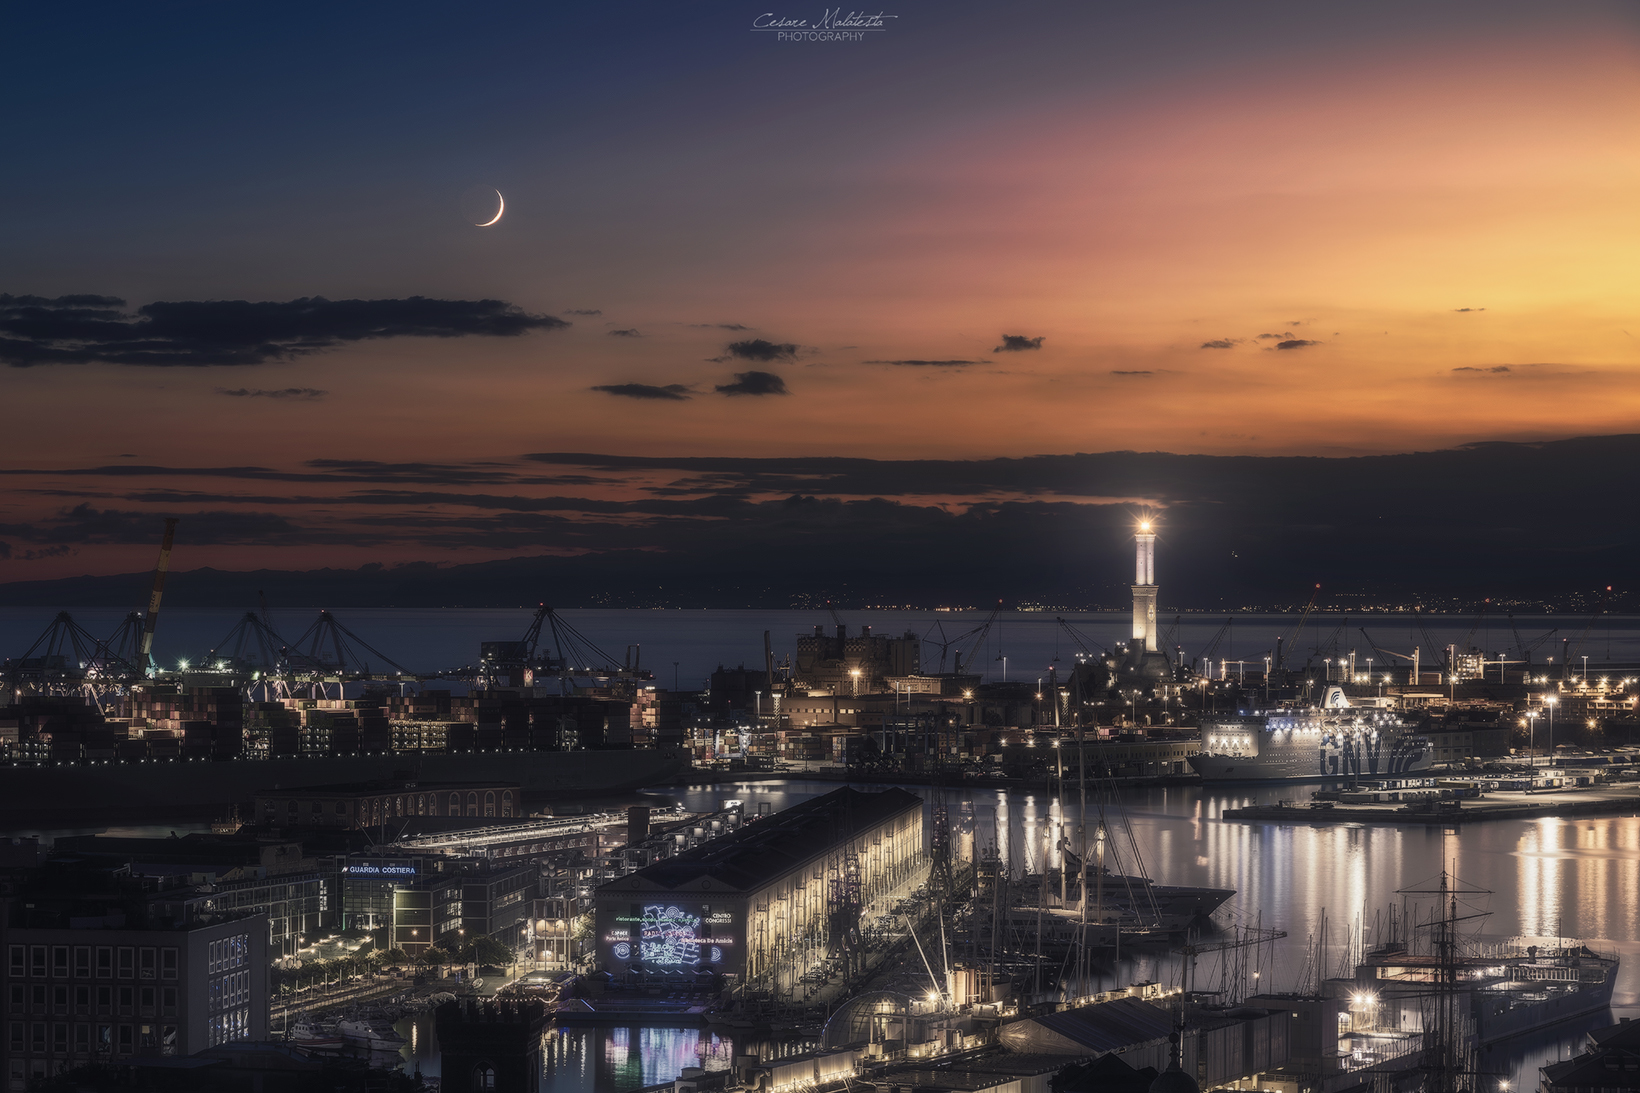 Moon sunset at blue hour - Ancient port of Genoa...